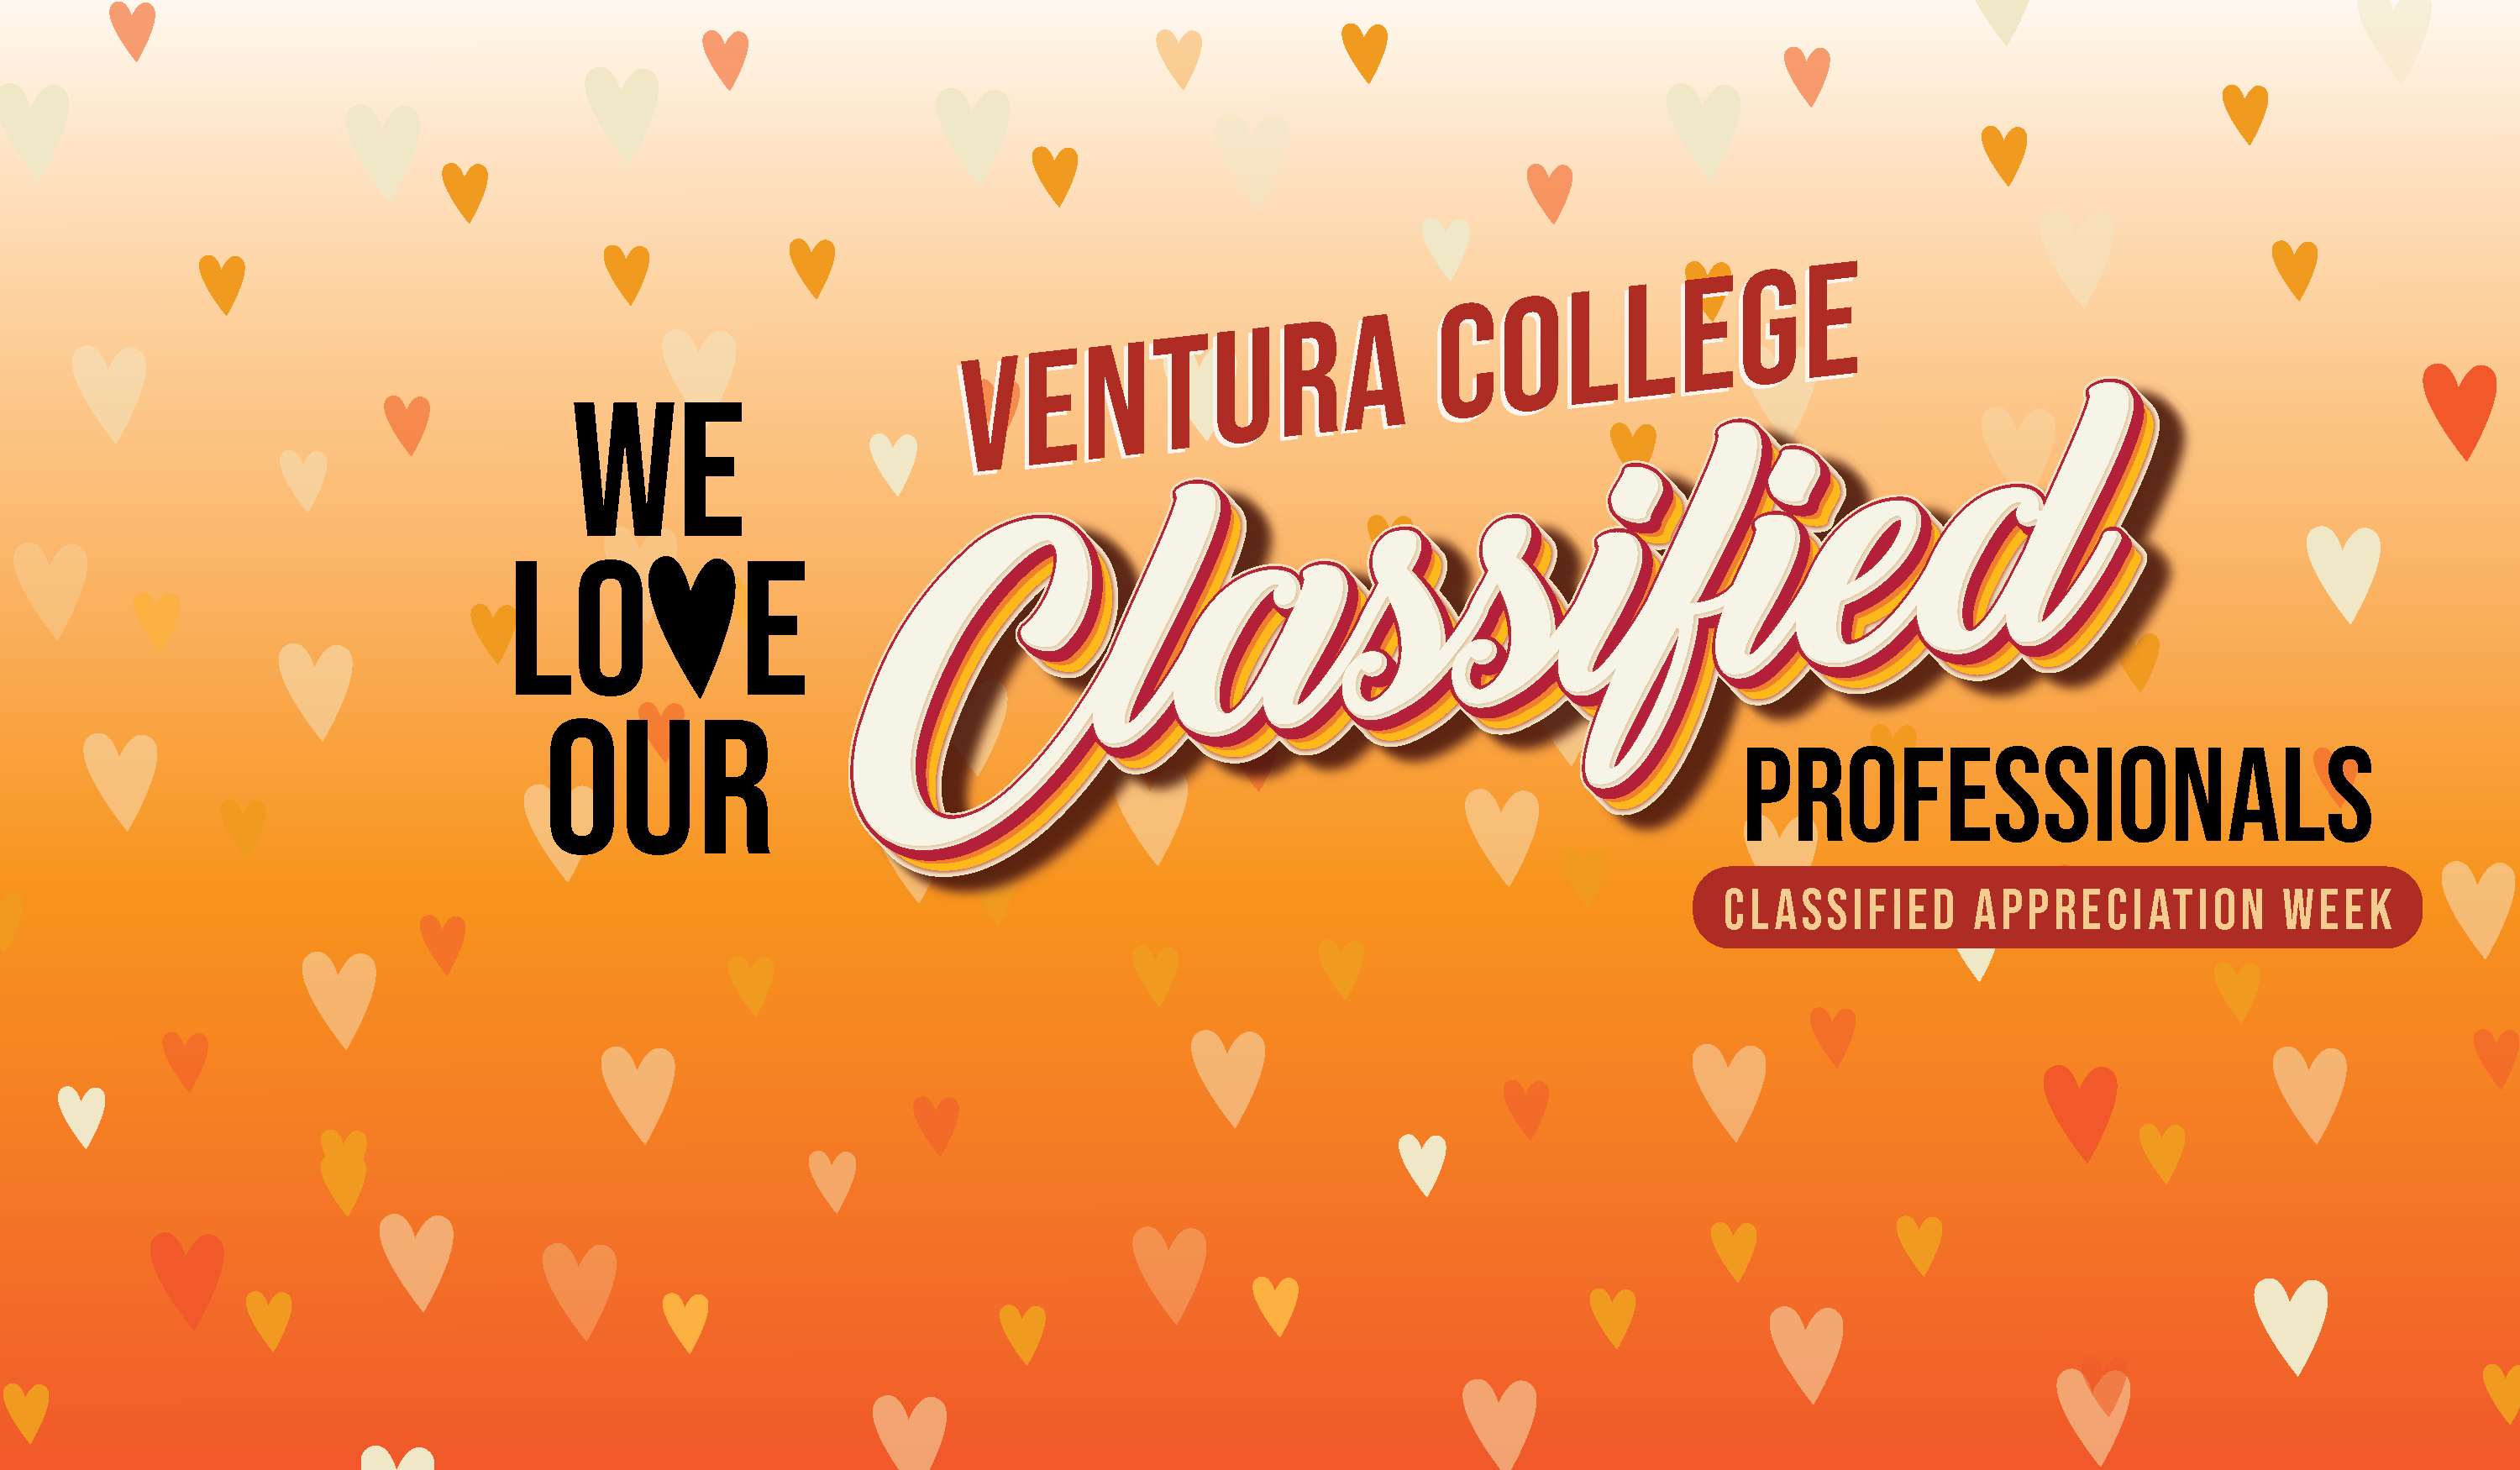 we love our ventura college classified professionals. Classified appreciation week